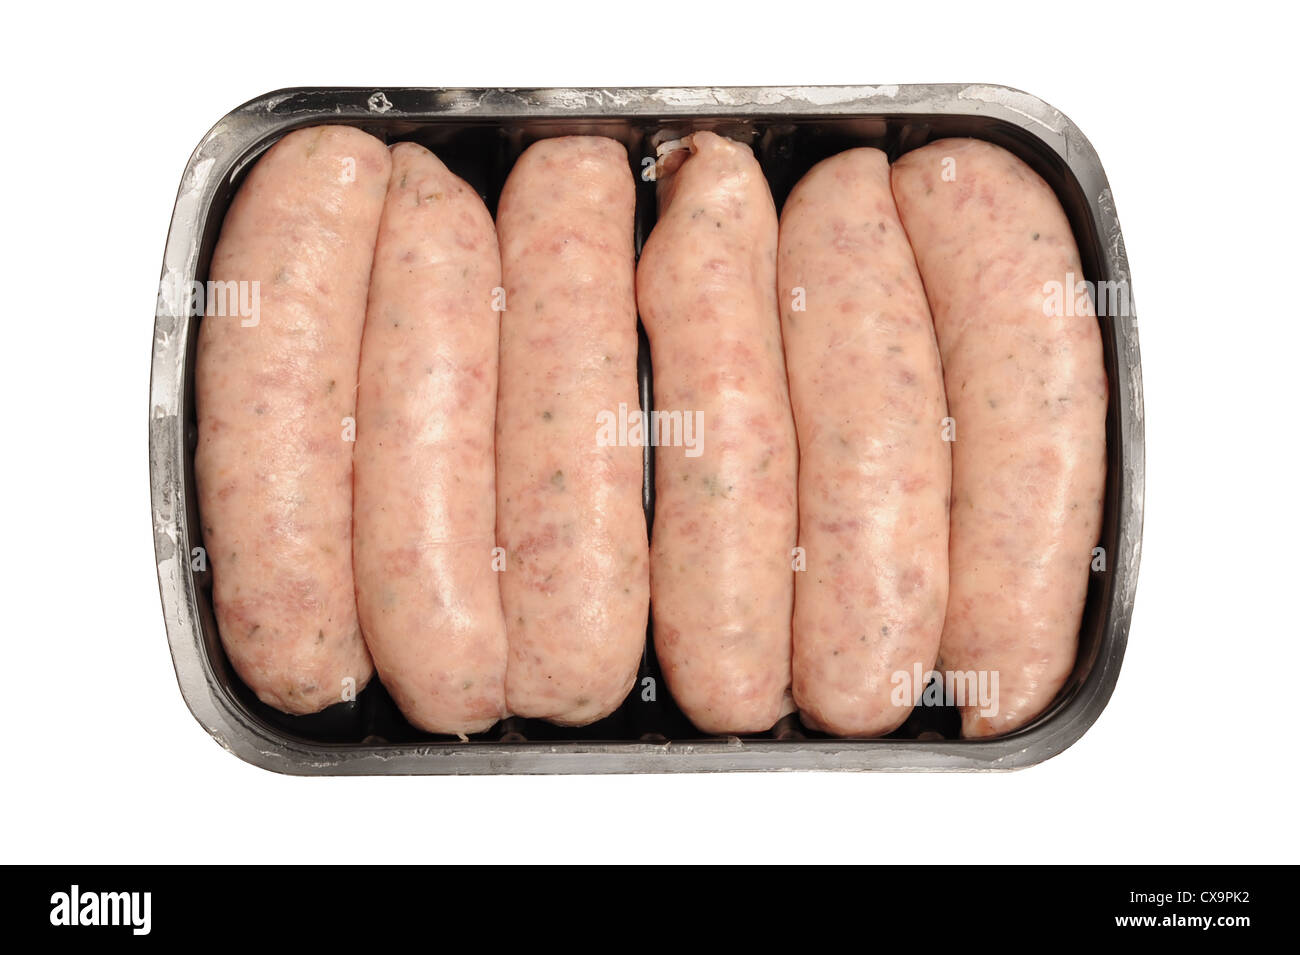 sausages in packaging Stock Photo